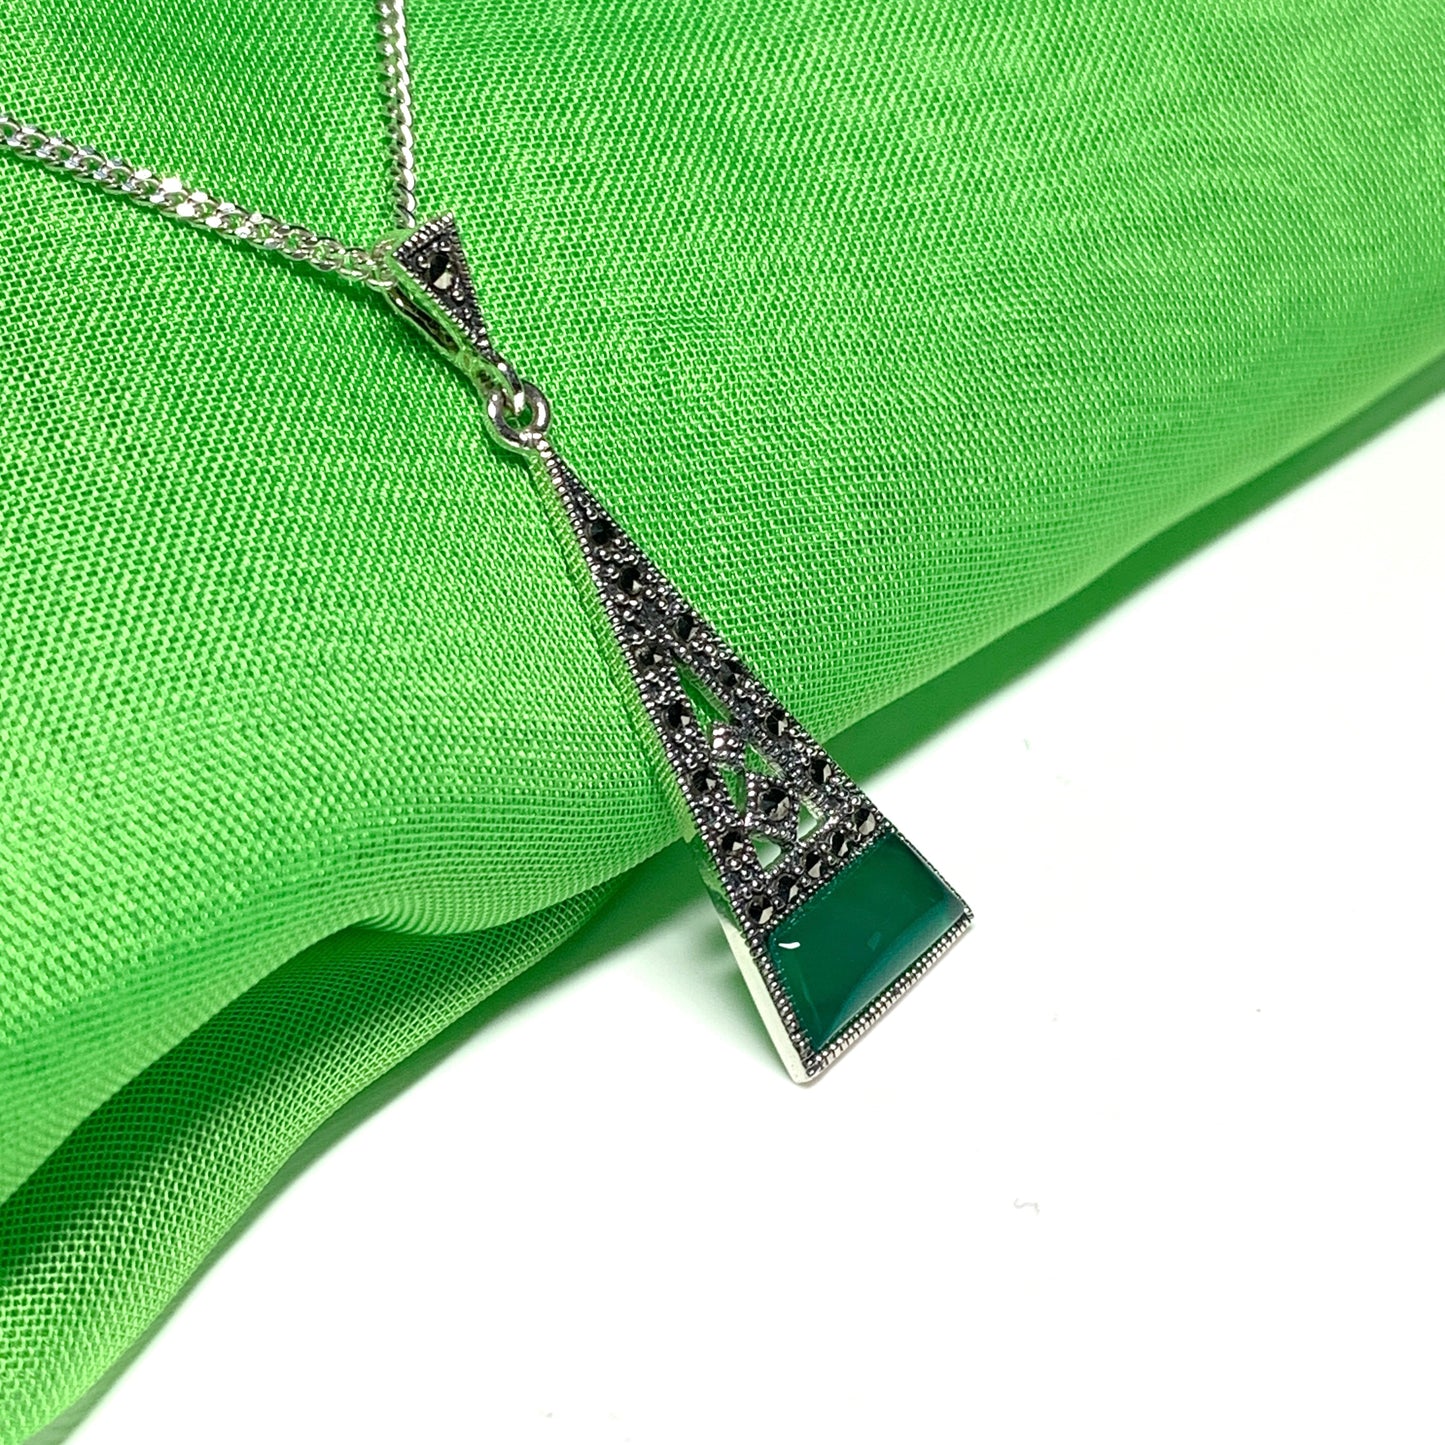 Green Agate And Marcasite Drop Kite Shaped Necklace Pendant Sterling Silver